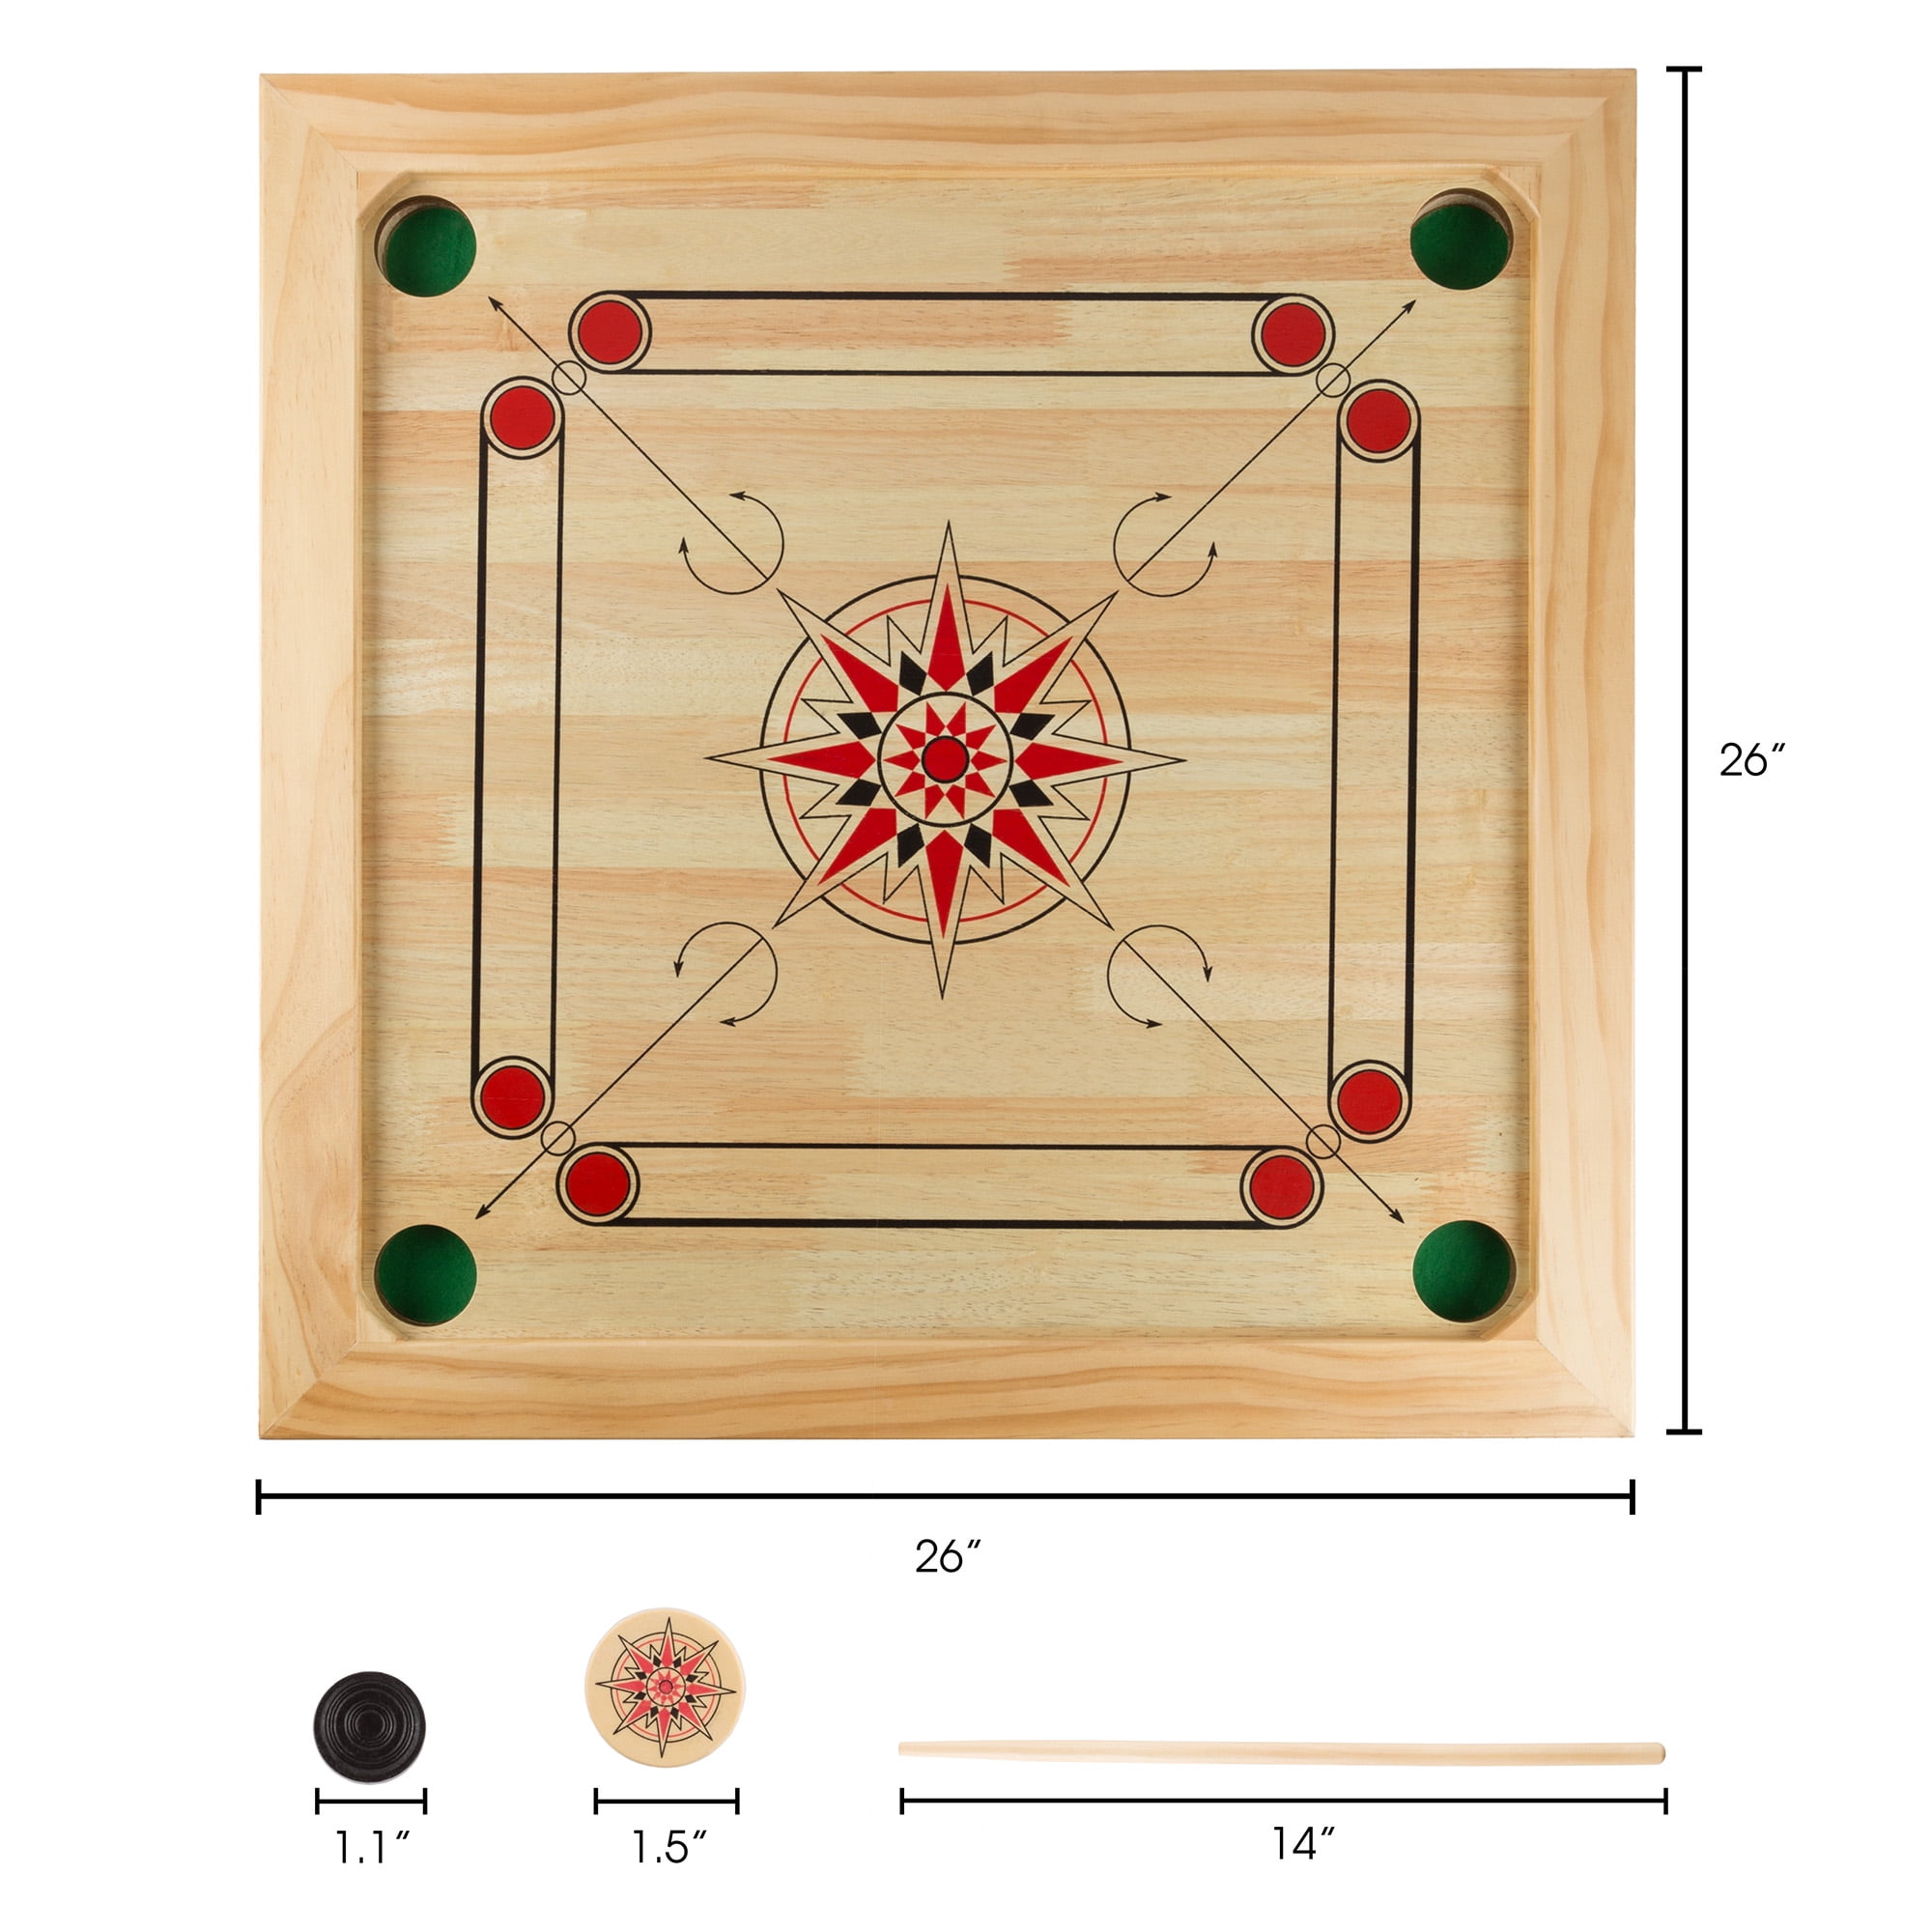 Details about   Carrom Board Board Game FREE SHIPPING CARROM COIN 